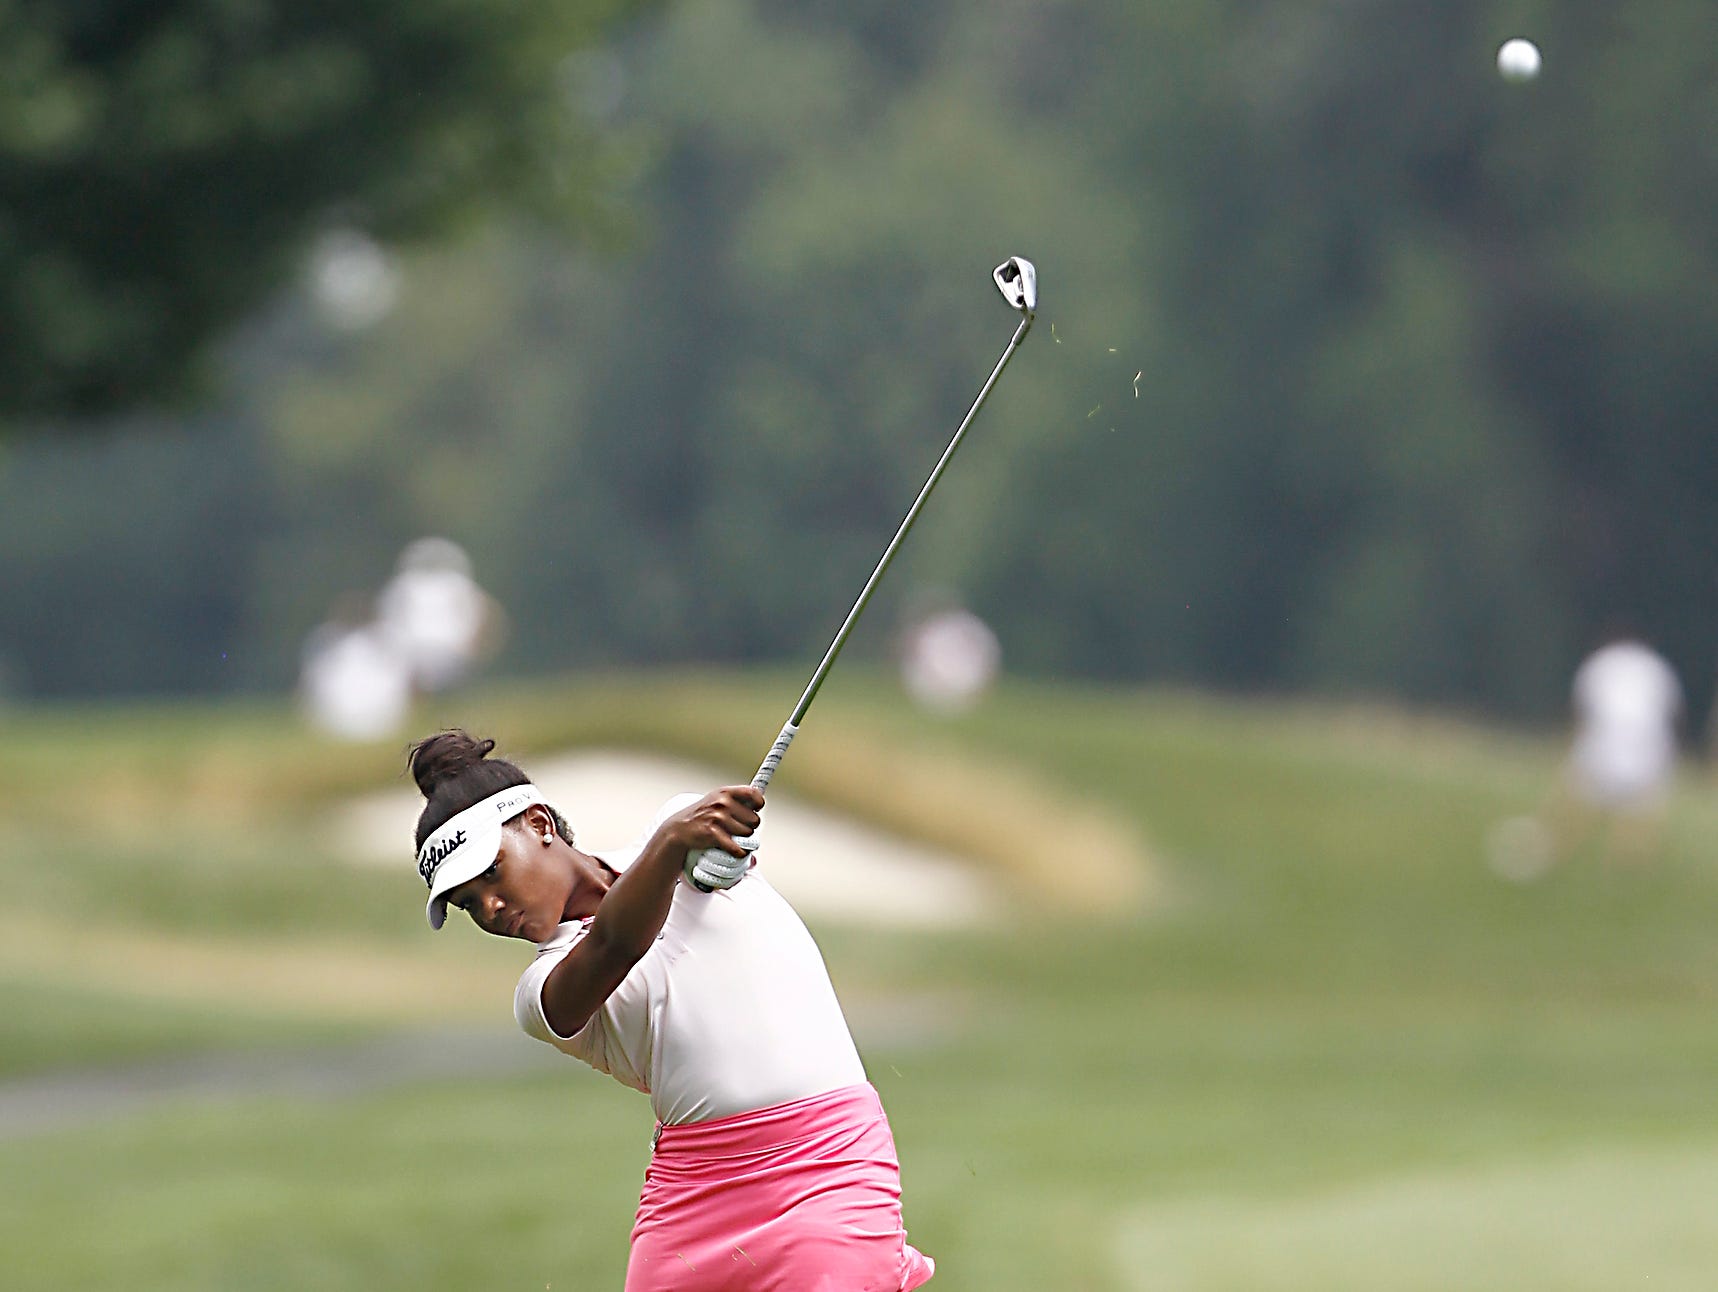 Kyra Cox, 16, from South Salem hits an approach shot in the 68th U.S. Girls Junior Amateur Championship at The Ridgewood Country Club in Paramus on July 18. Cox recently played in the 2016 Drive, Chip & Putt National Championship at Augusta National and was the Metropolitan PGA Player of the Year three consecutive times from 2013 to 2015.